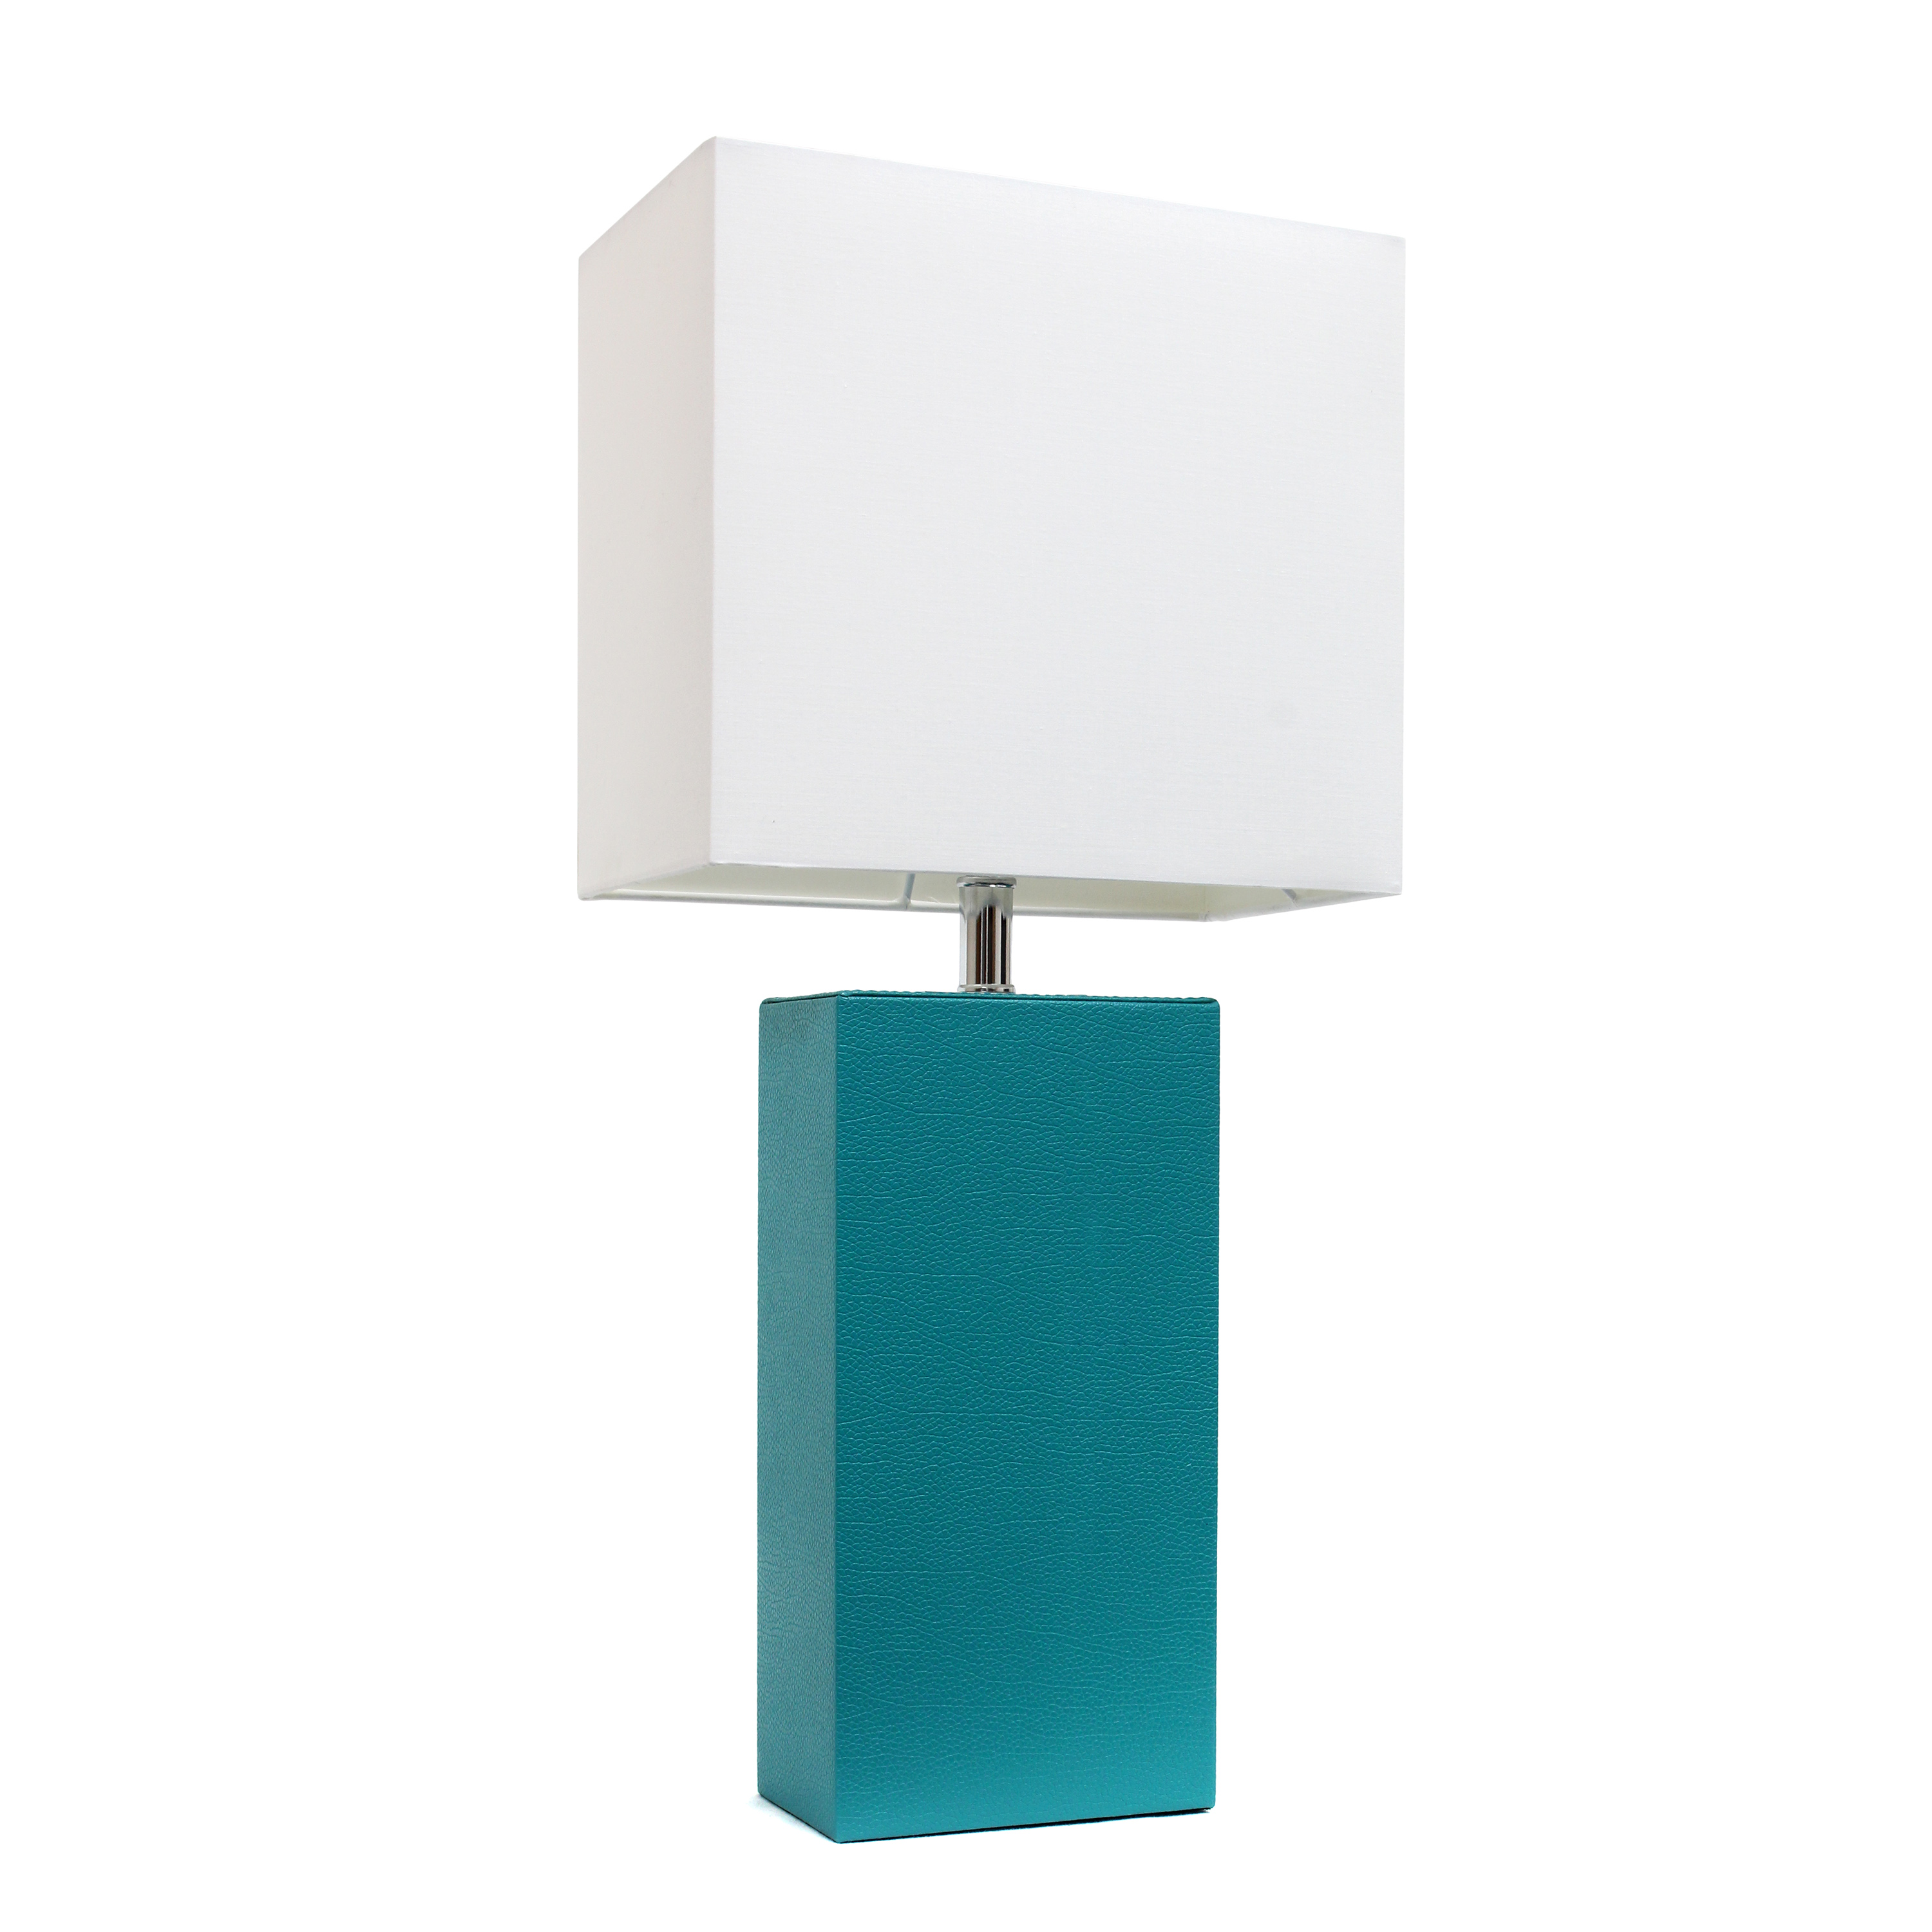 Elegant Designs Modern Leather Table Lamp with White Fabric Shade, Teal